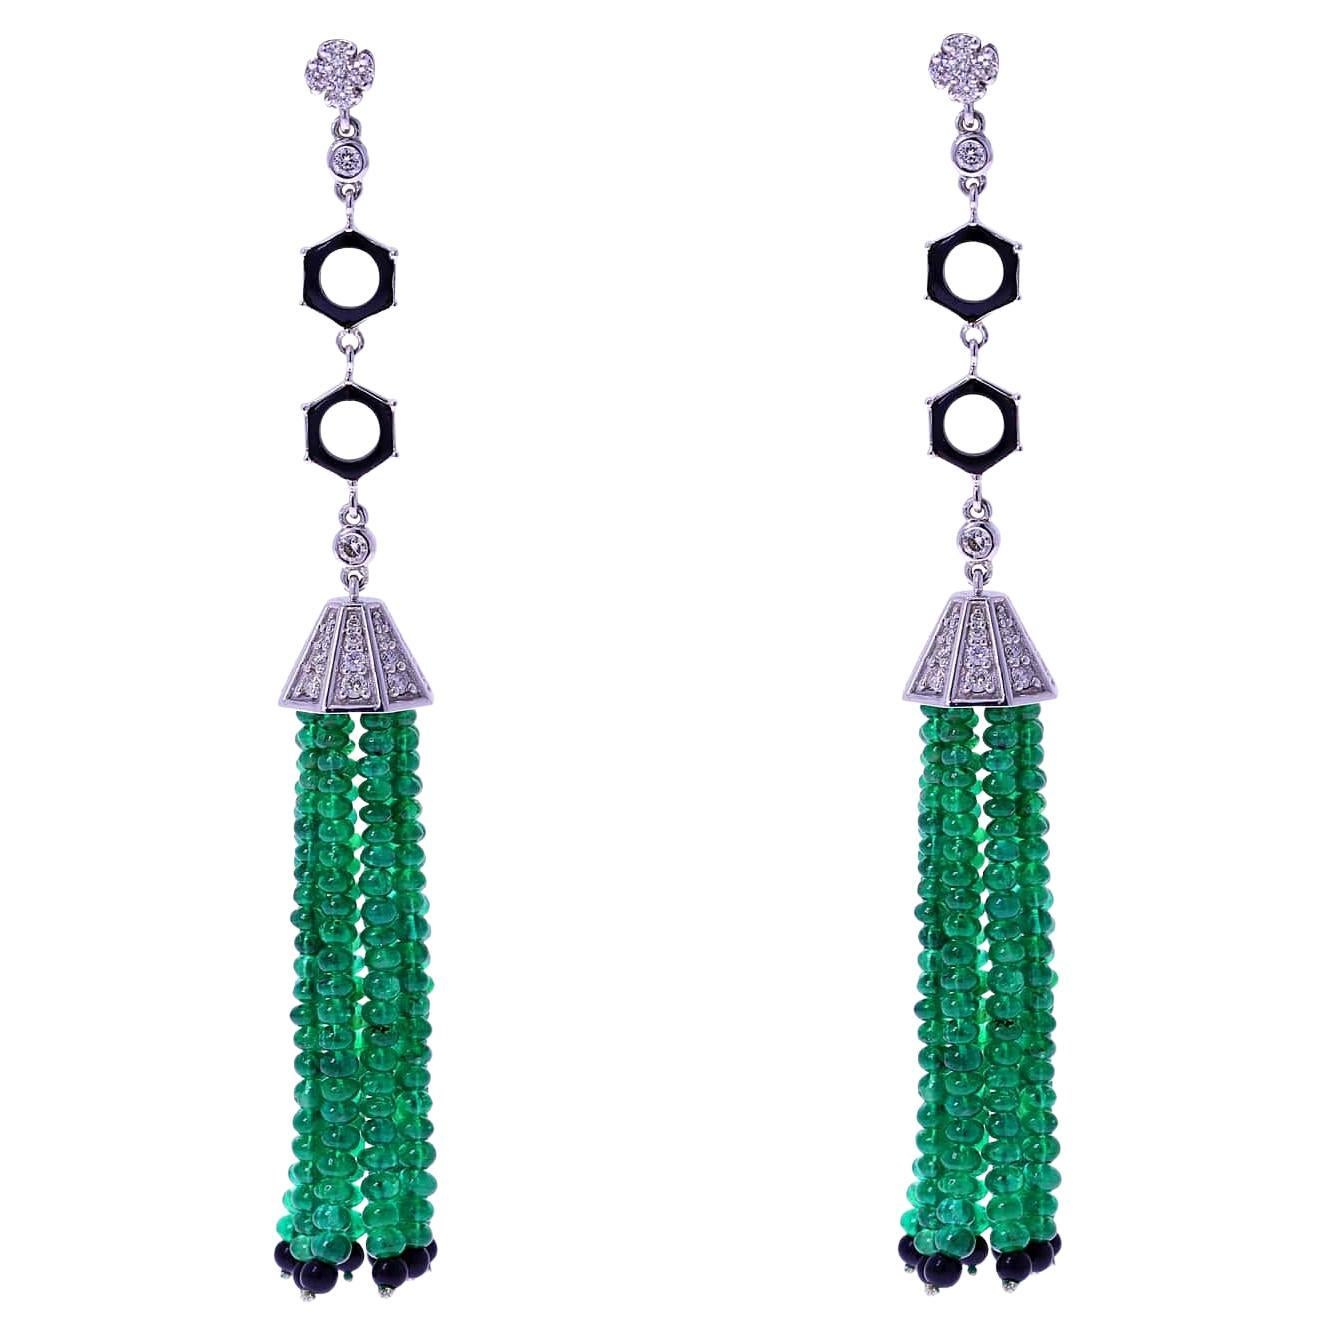 Emerald Beads Tassel Earrings with Diamonds and Onyx, 18k For Sale